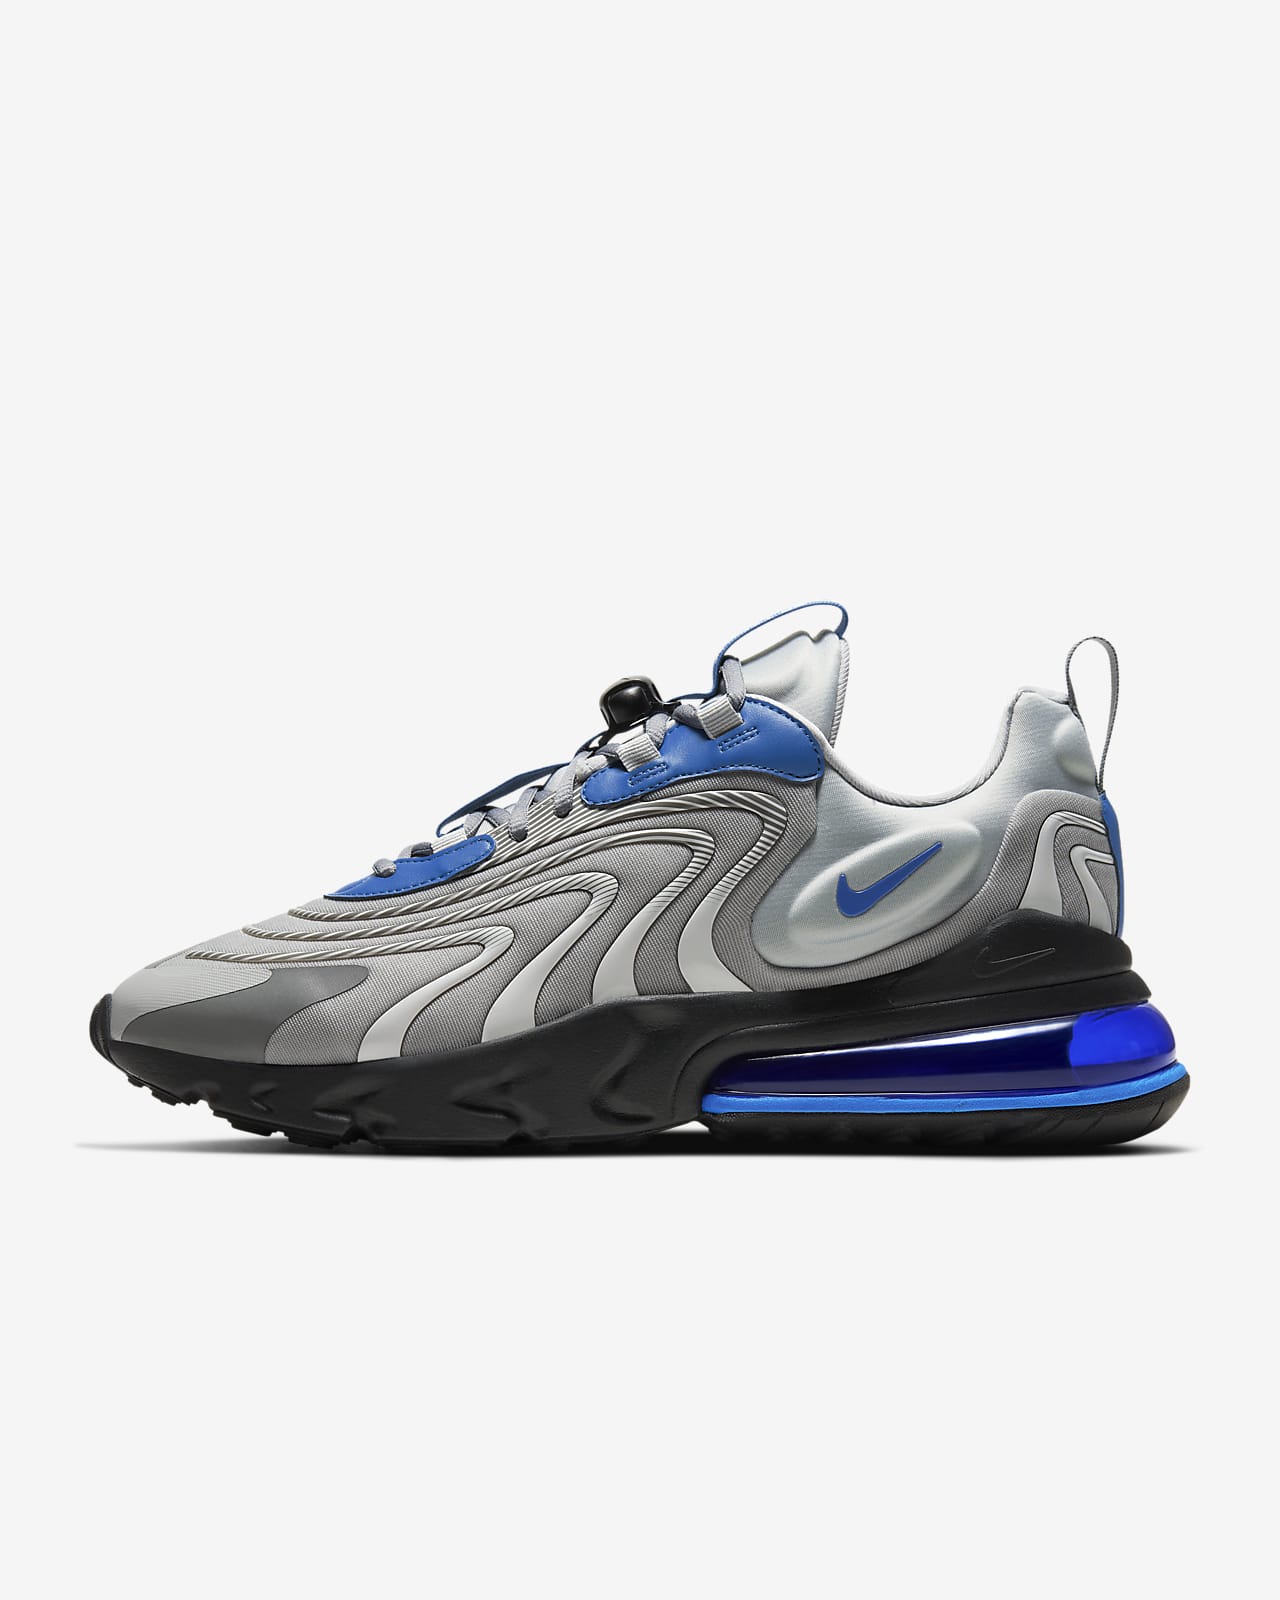 Air Max 970 Black Online Sales, UP TO 70% OFF